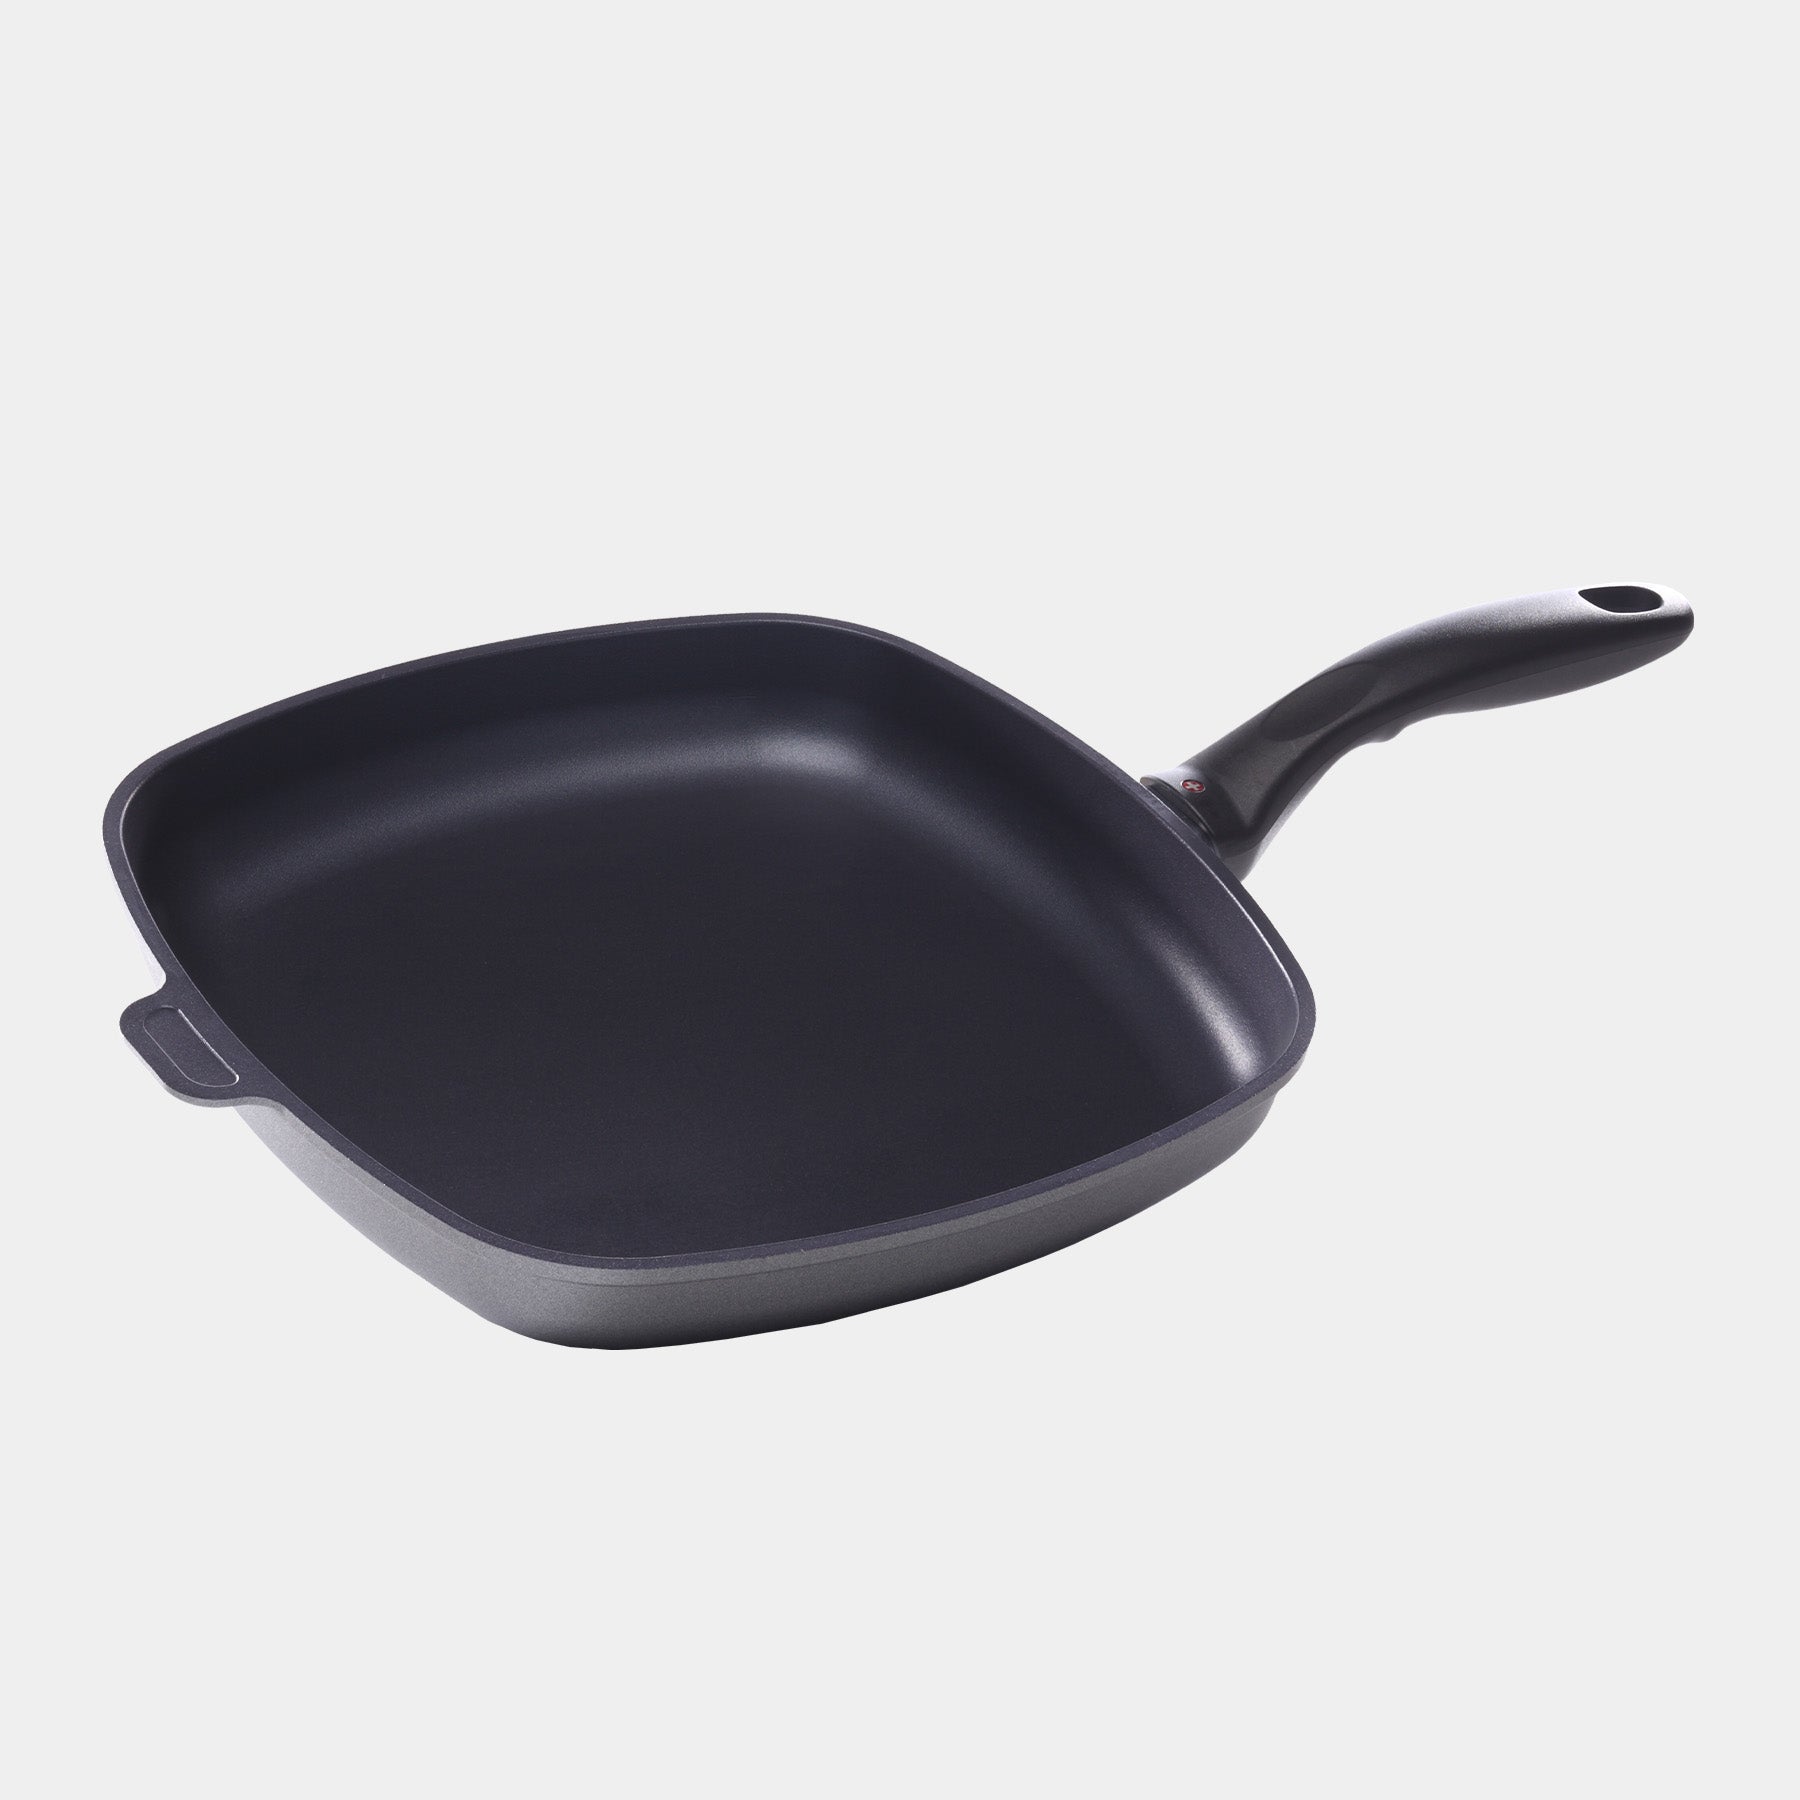 HD Nonstick 11" x 11" Square Fry Pan - Induction